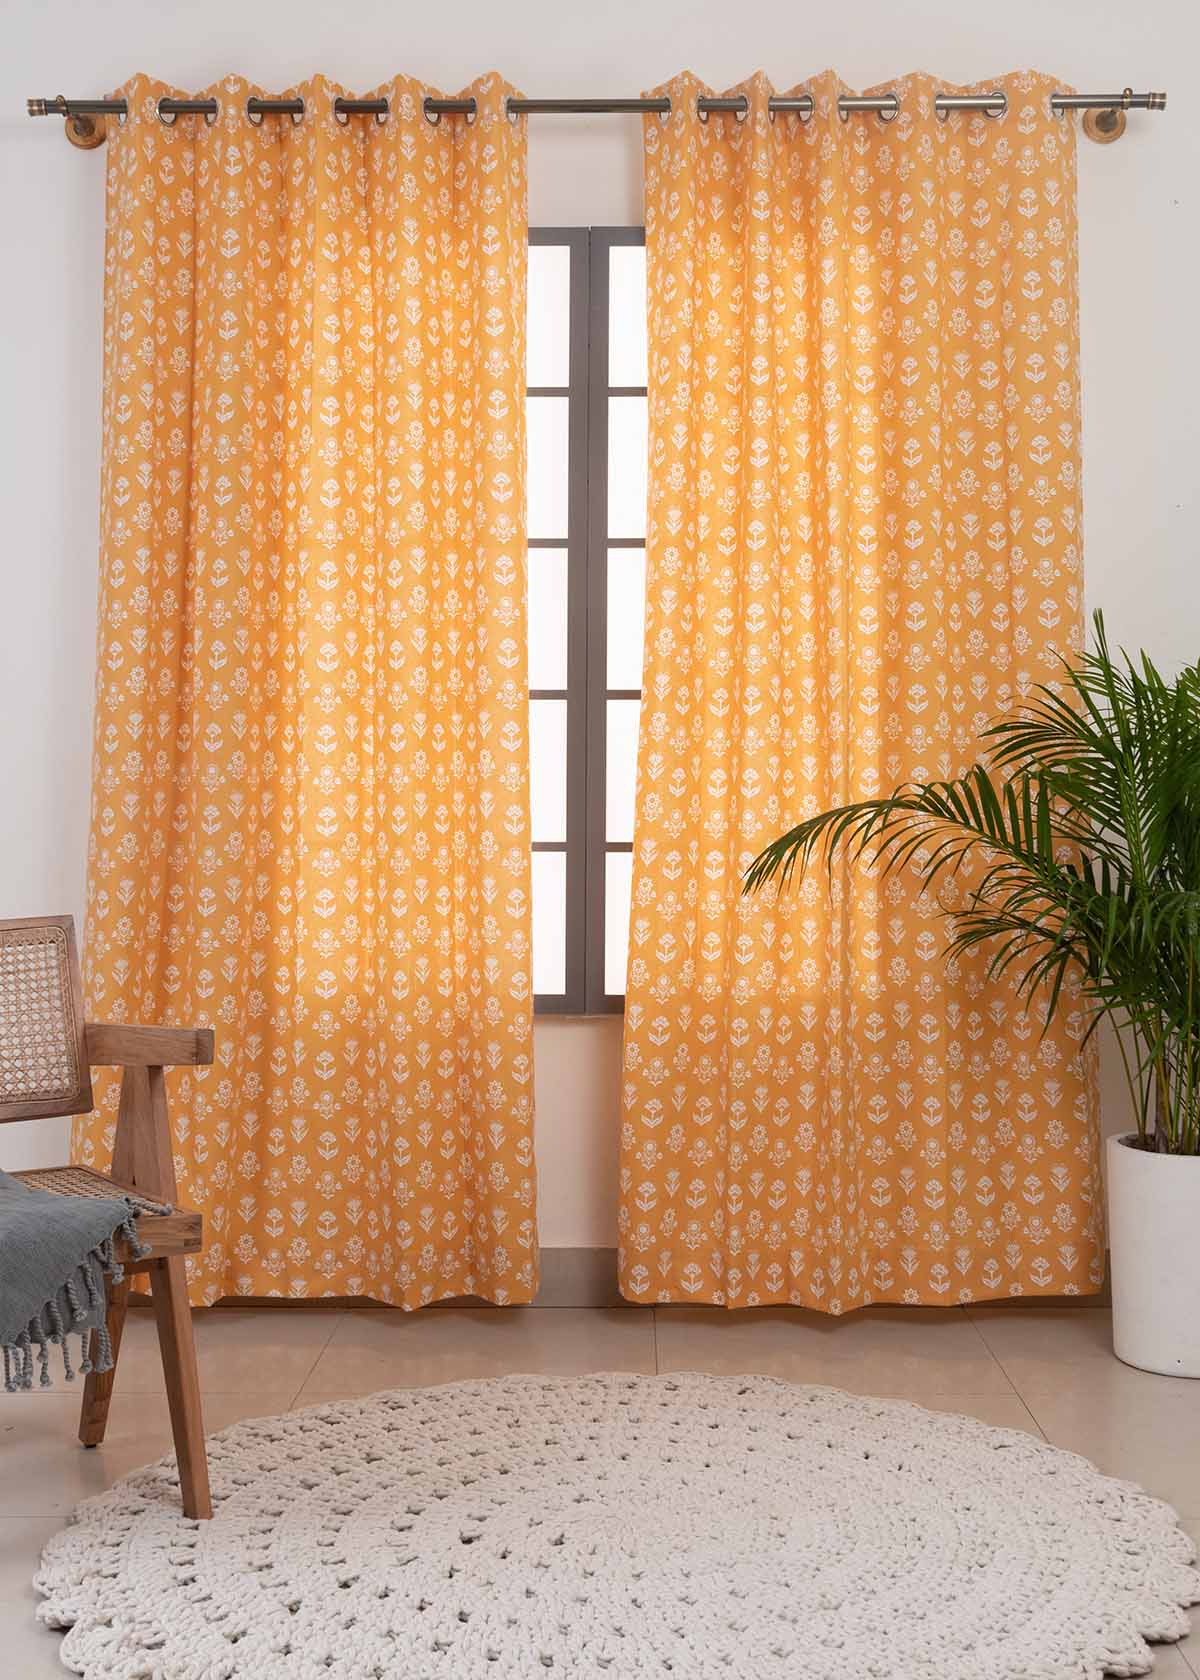 Dahlia 100% cotton floral curtain for living room - Room darkening - Mustard - Pack of 1 - Pack of 1